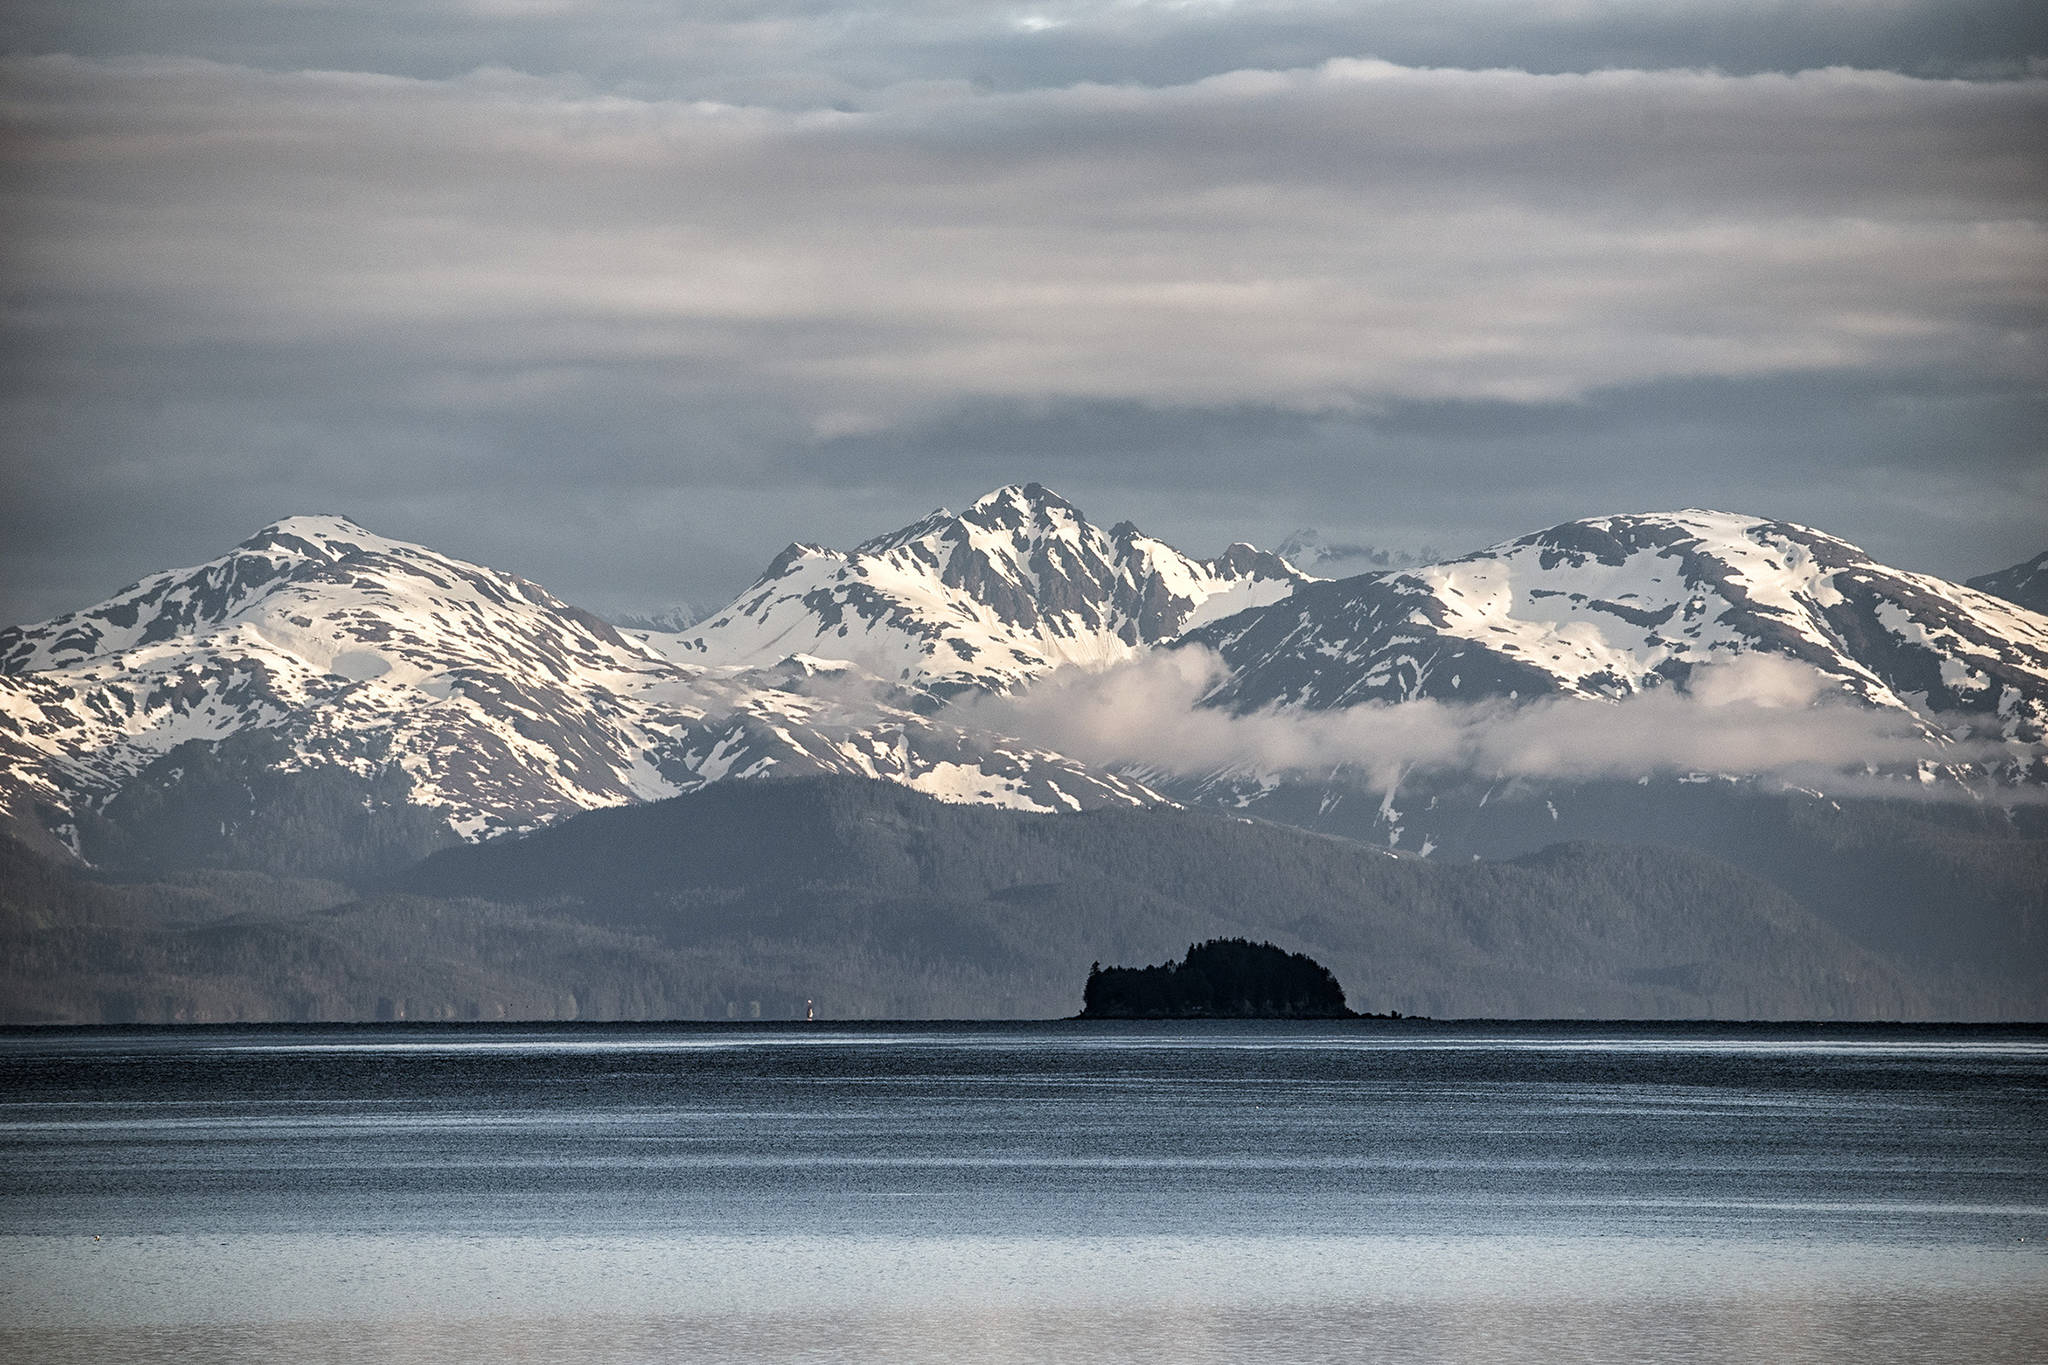 The Chilkat Range can be seen with Sentinel Island and Vanderbilt Reef. (Courtesy Photo | Kenneth Gill, gillfoto)